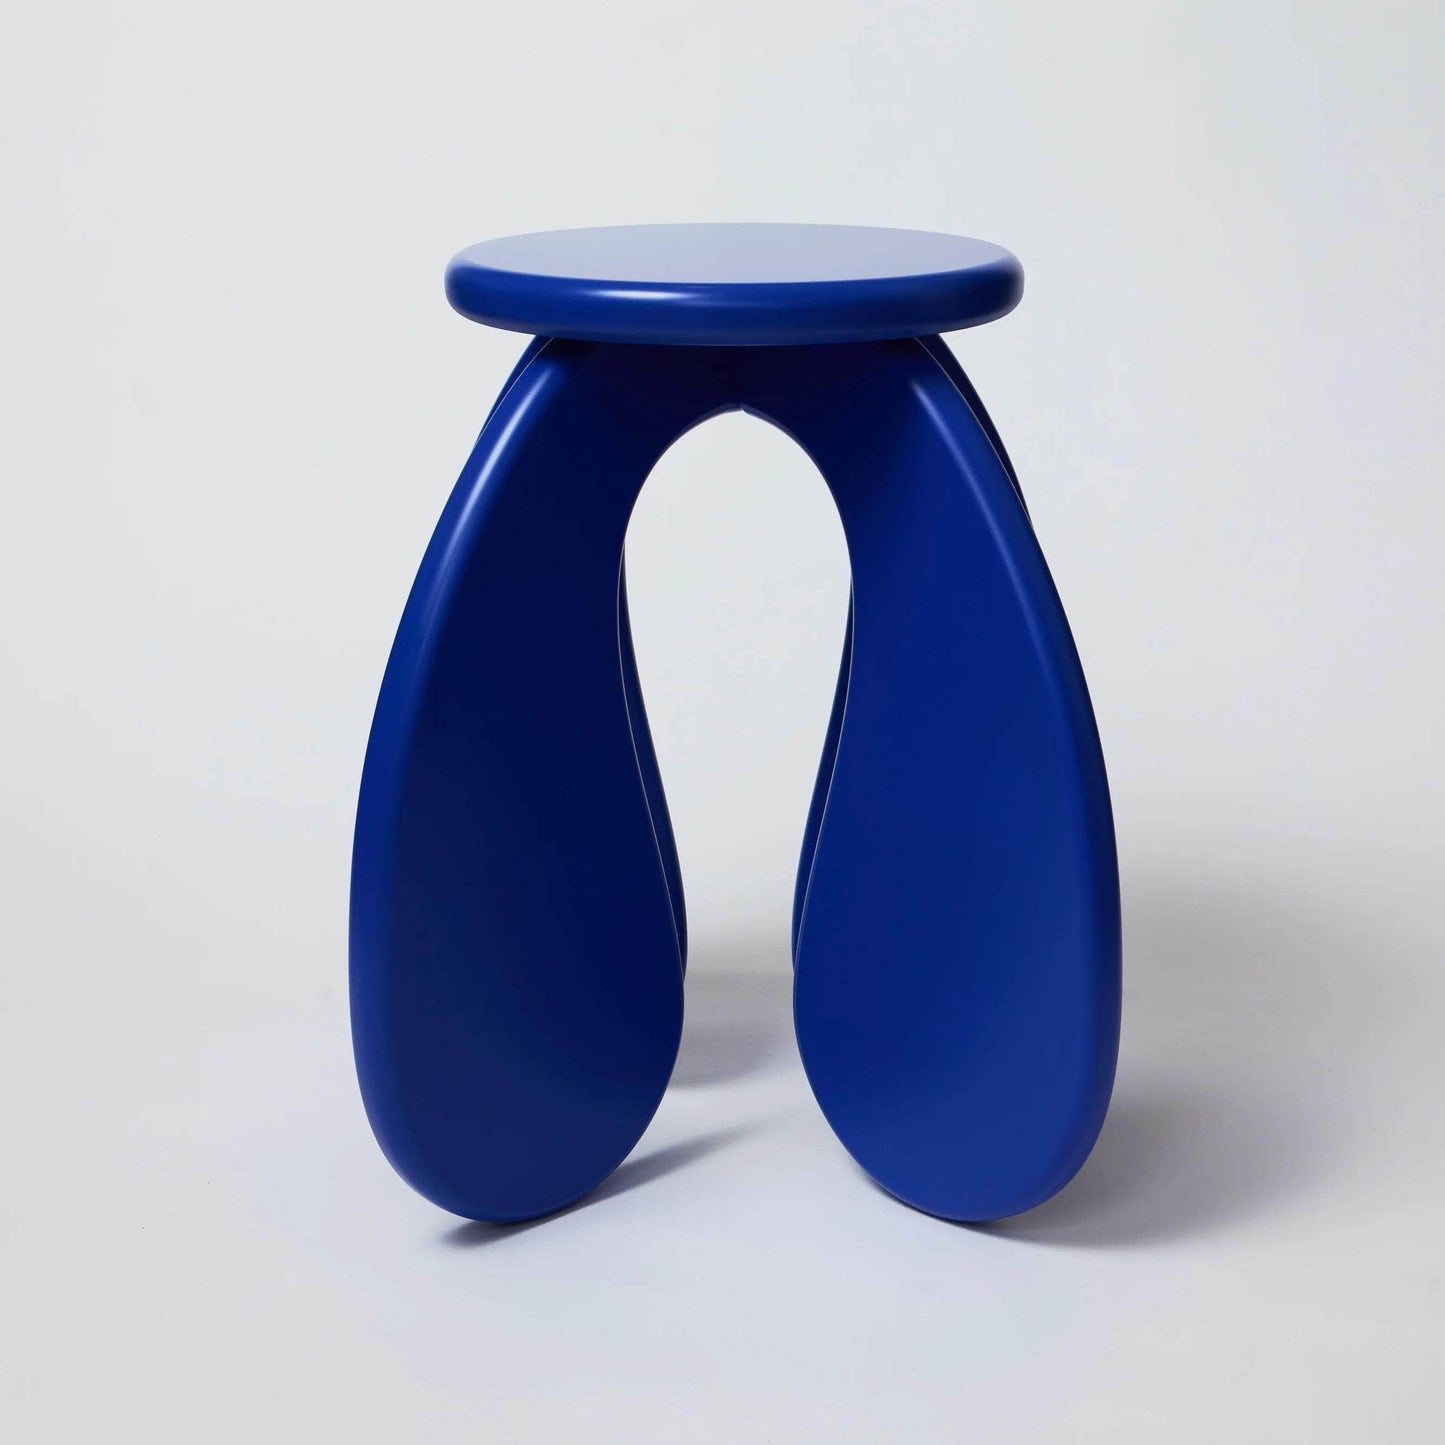 SPACE Side Table in Electric Blue